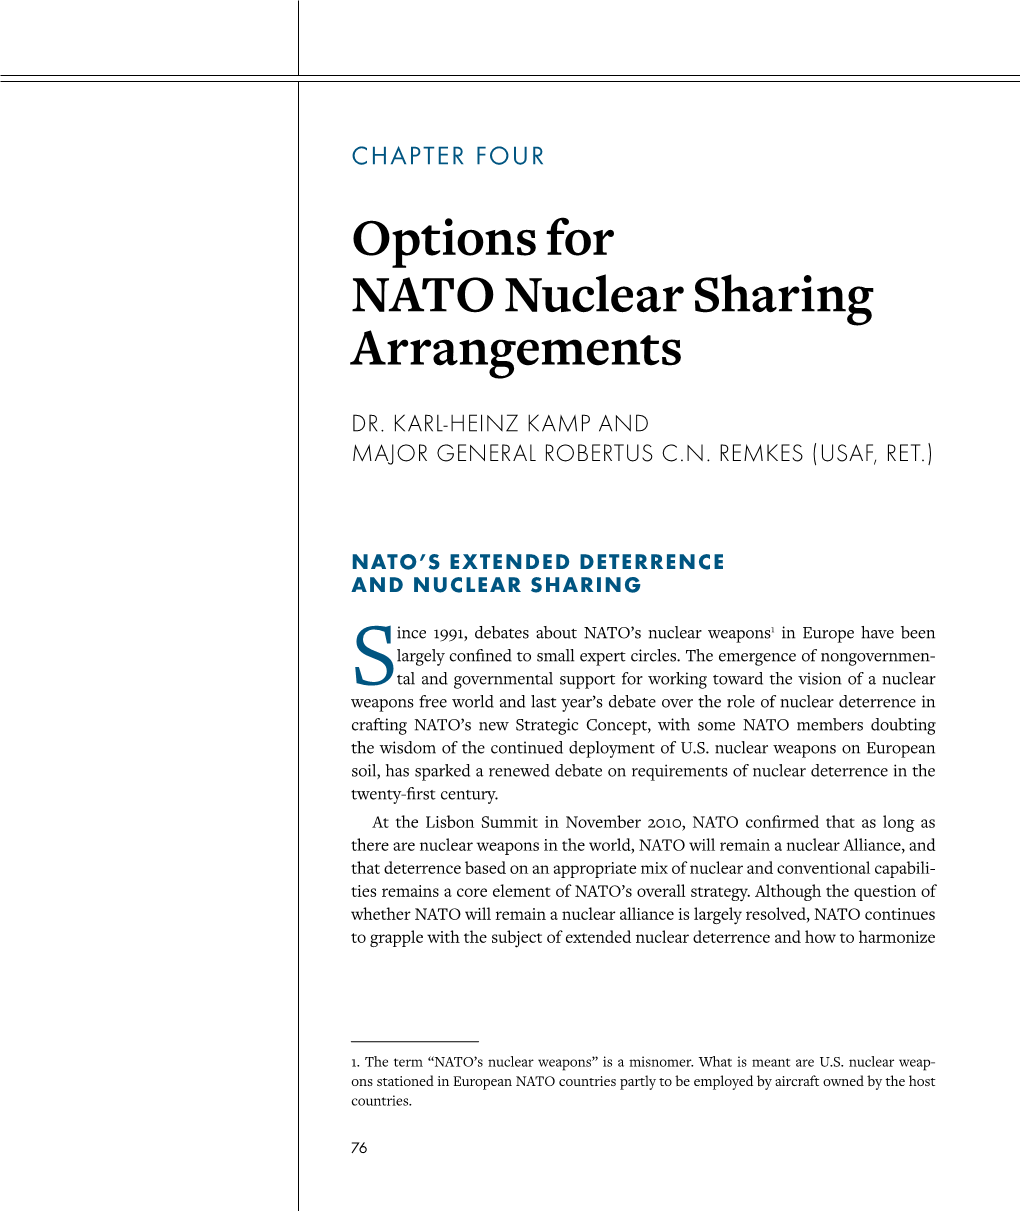 Options for NATO Nuclear Sharing Arrangements